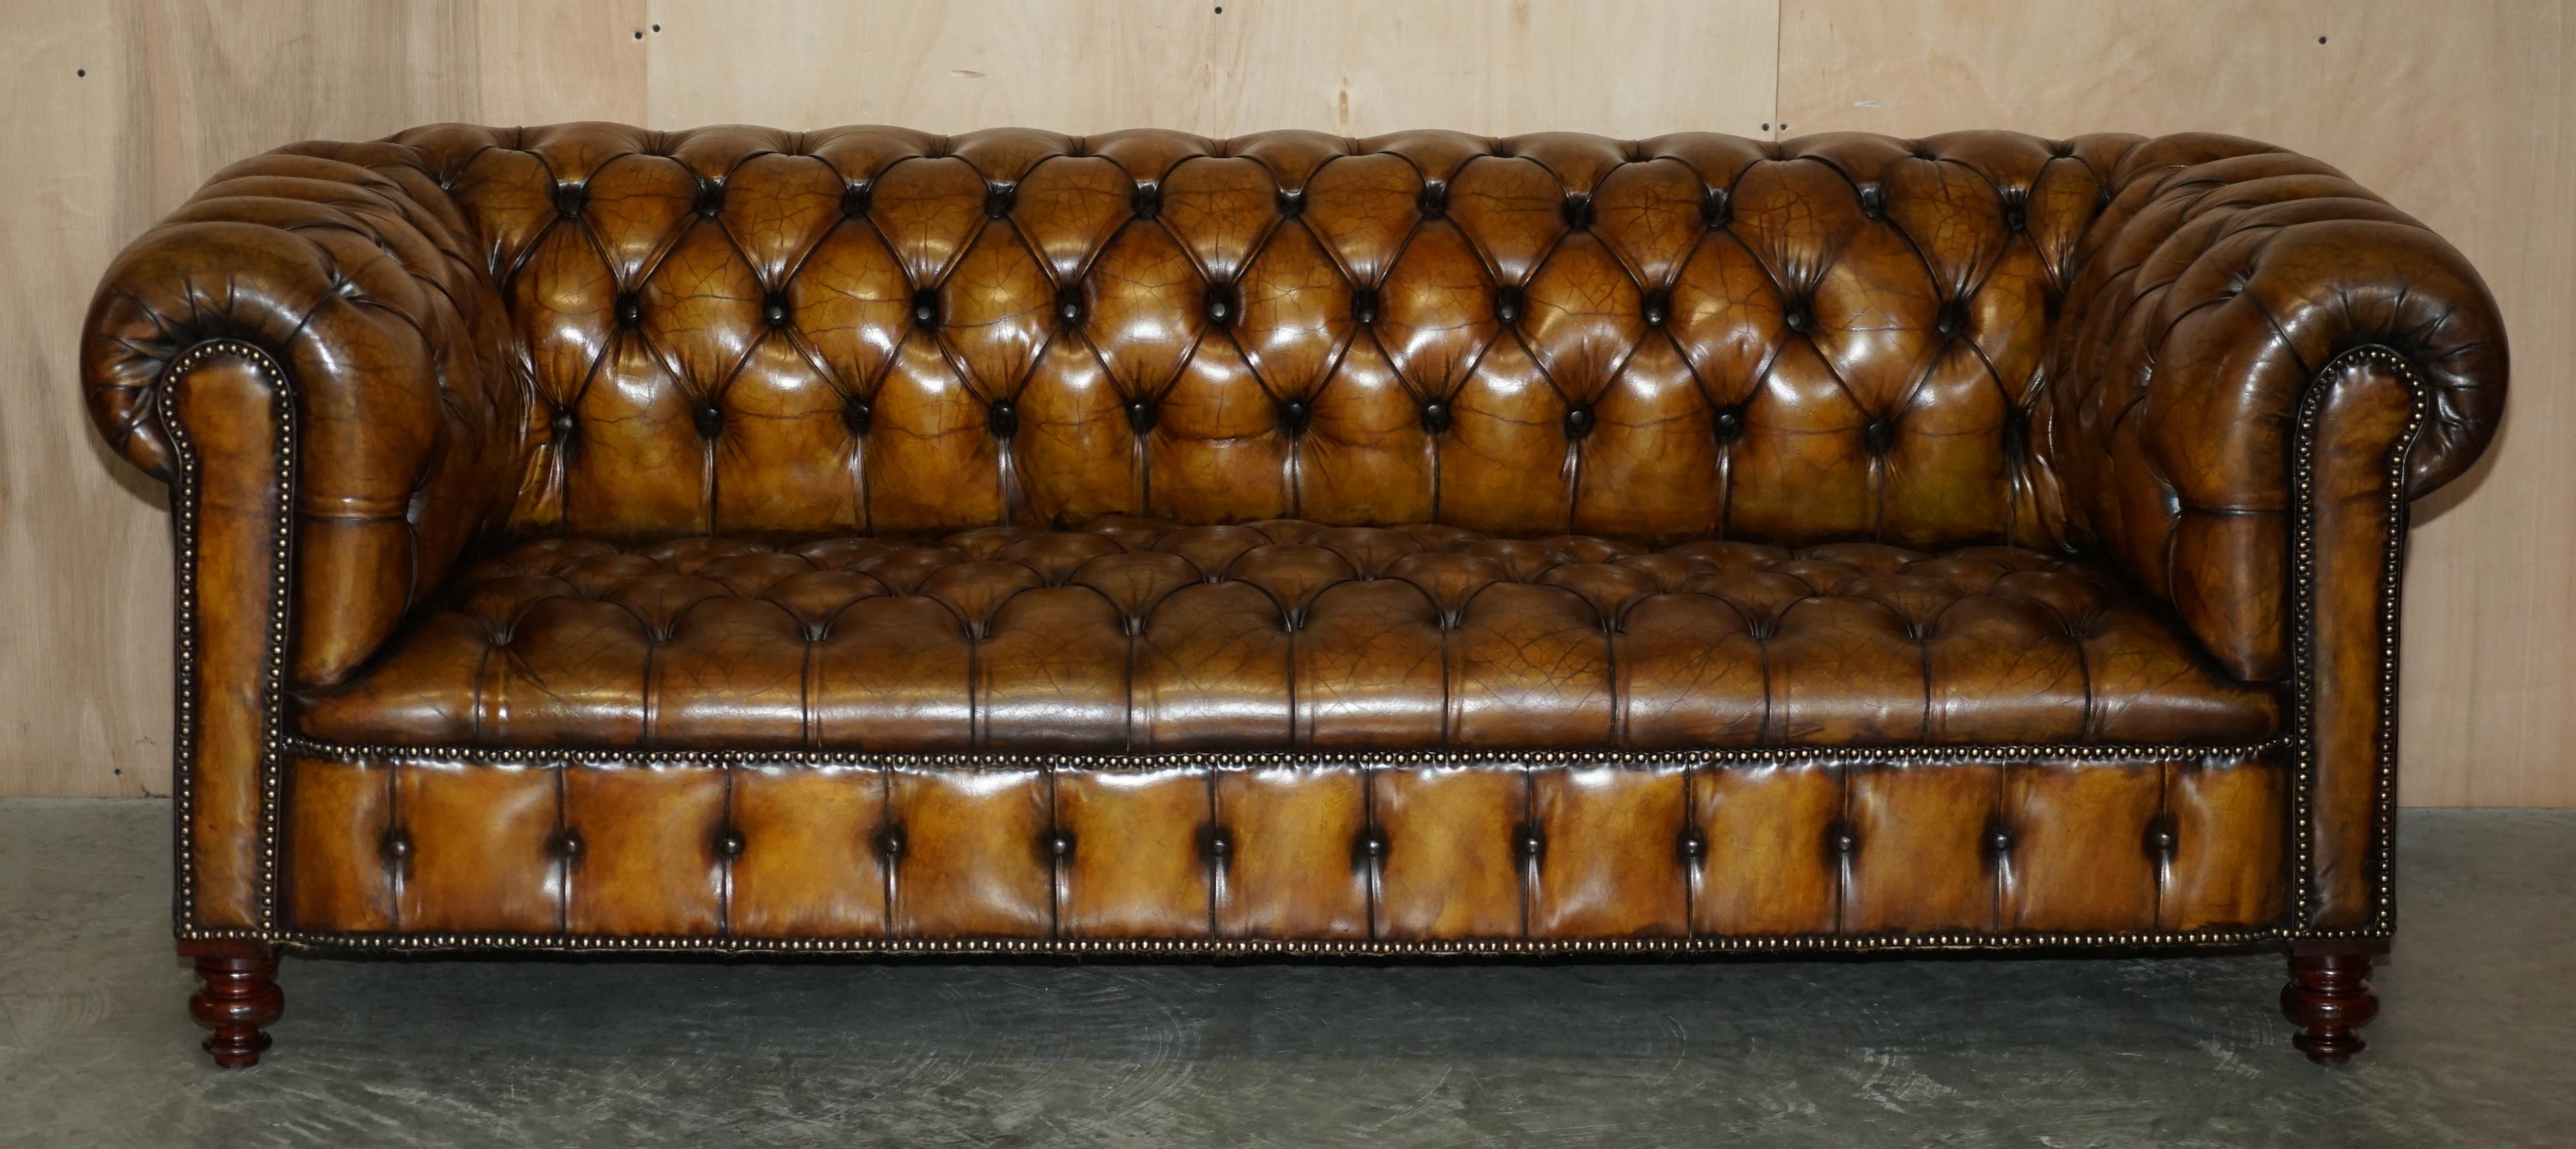 We are delighted to offer for sale this stunning, fully restored, hand dyed cigar brown leather, Antique Victorian circa 1880 Chesterfield club sofa.

This sofa is very unique, it has a wonderful original Walnut turned legs which are solid to the